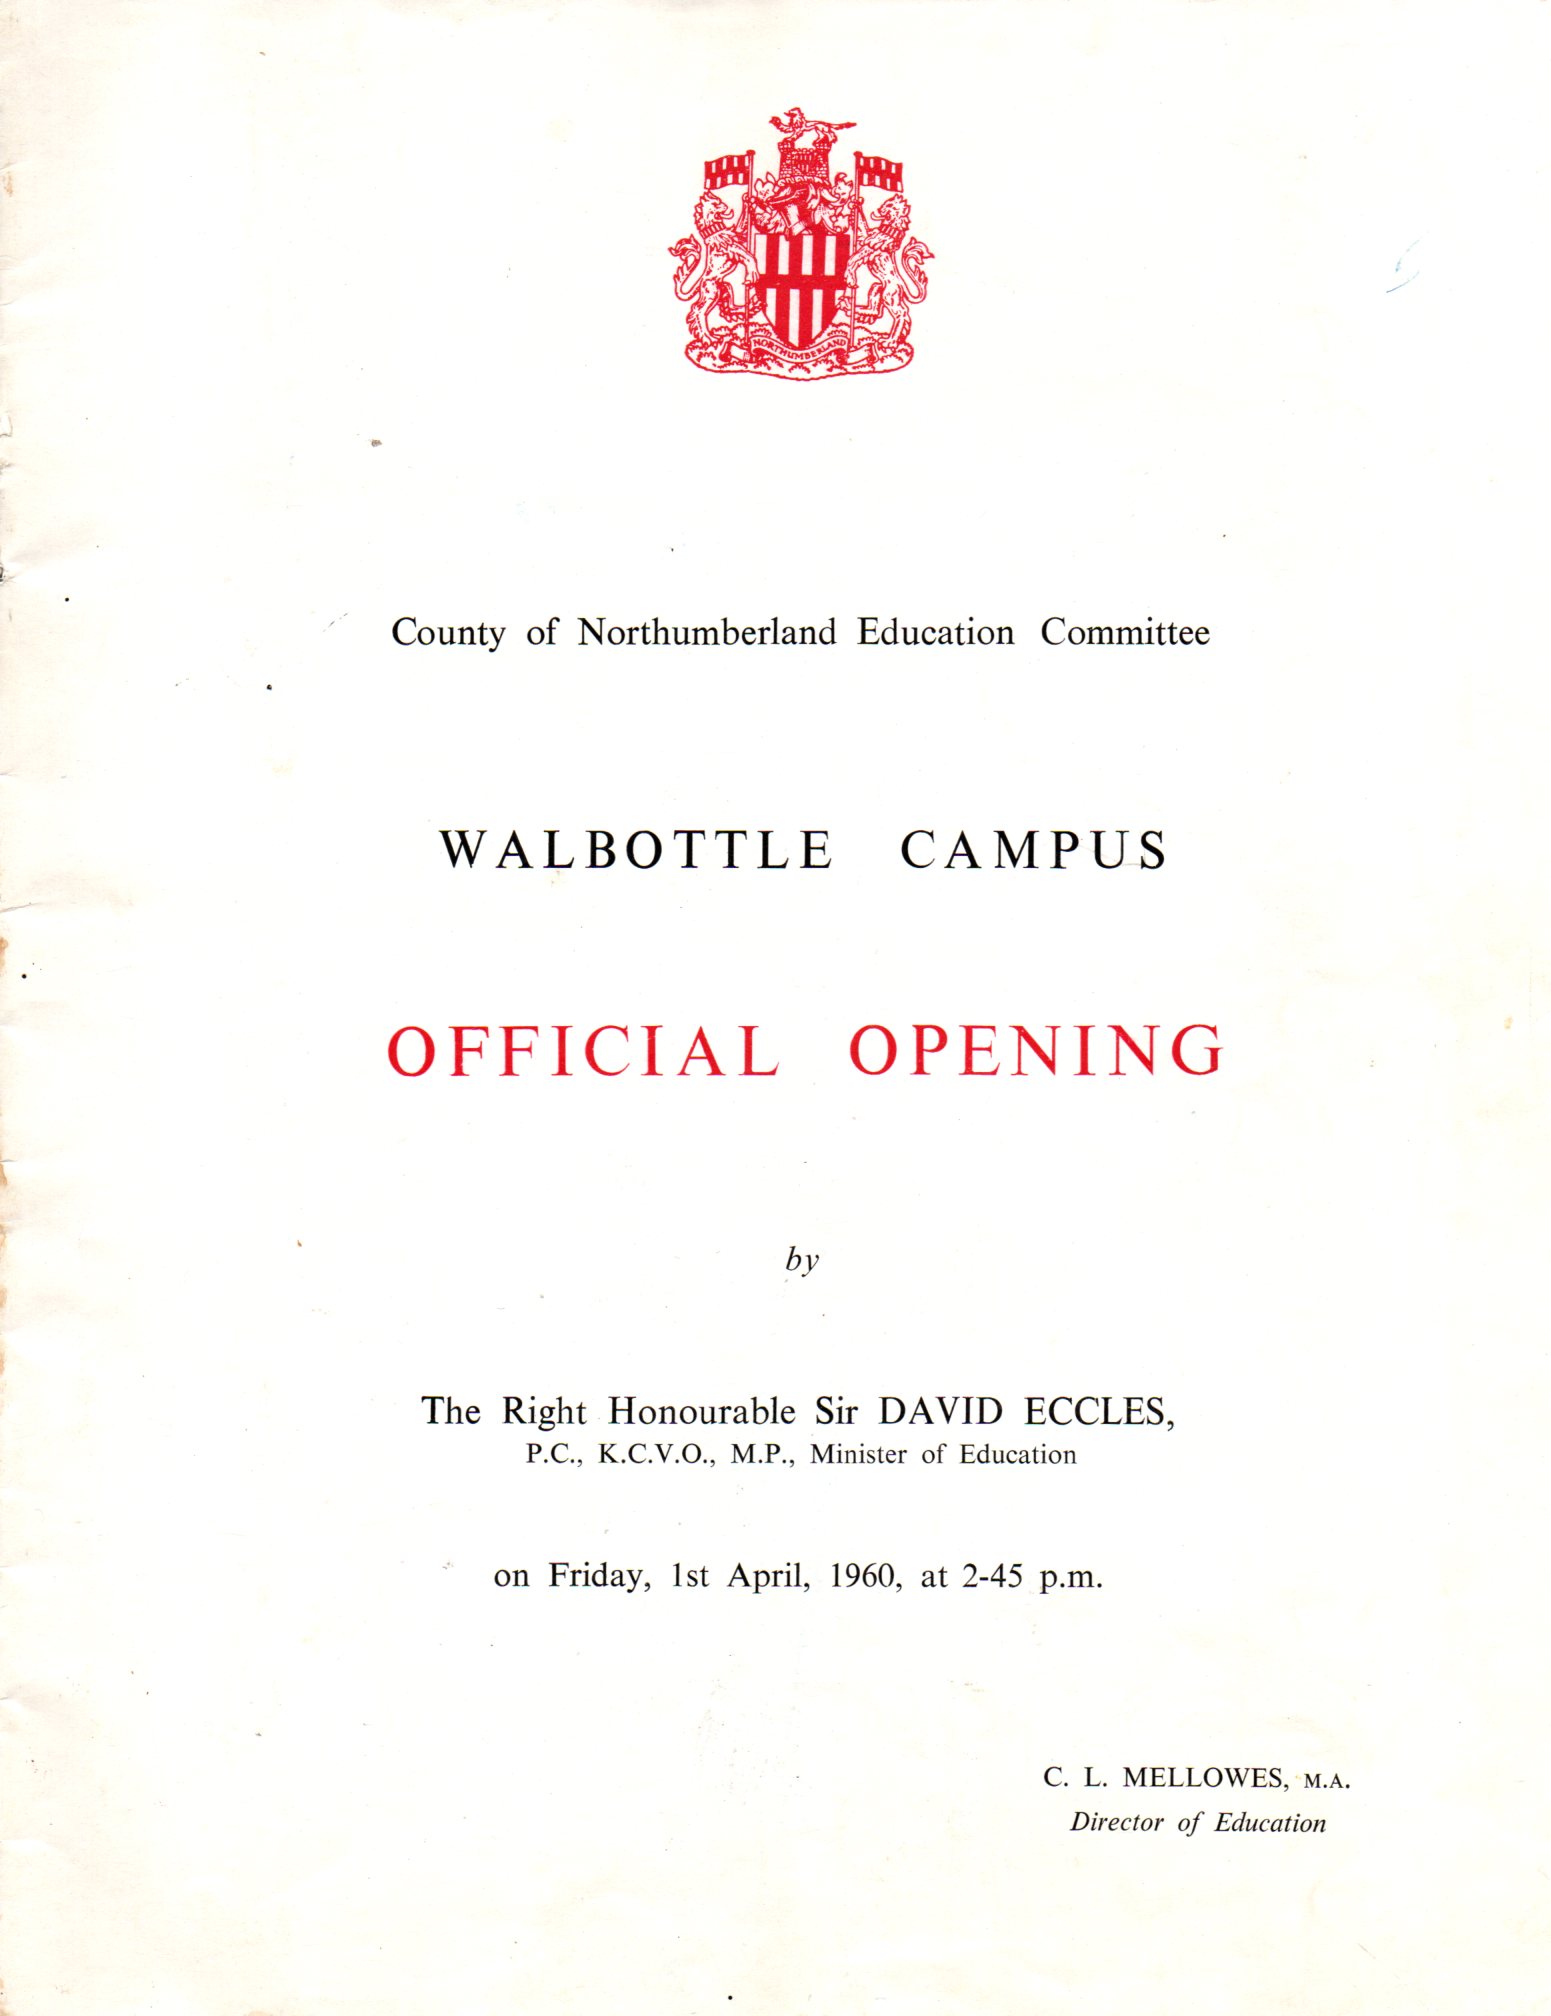 Walbottle Campus Official Opening document